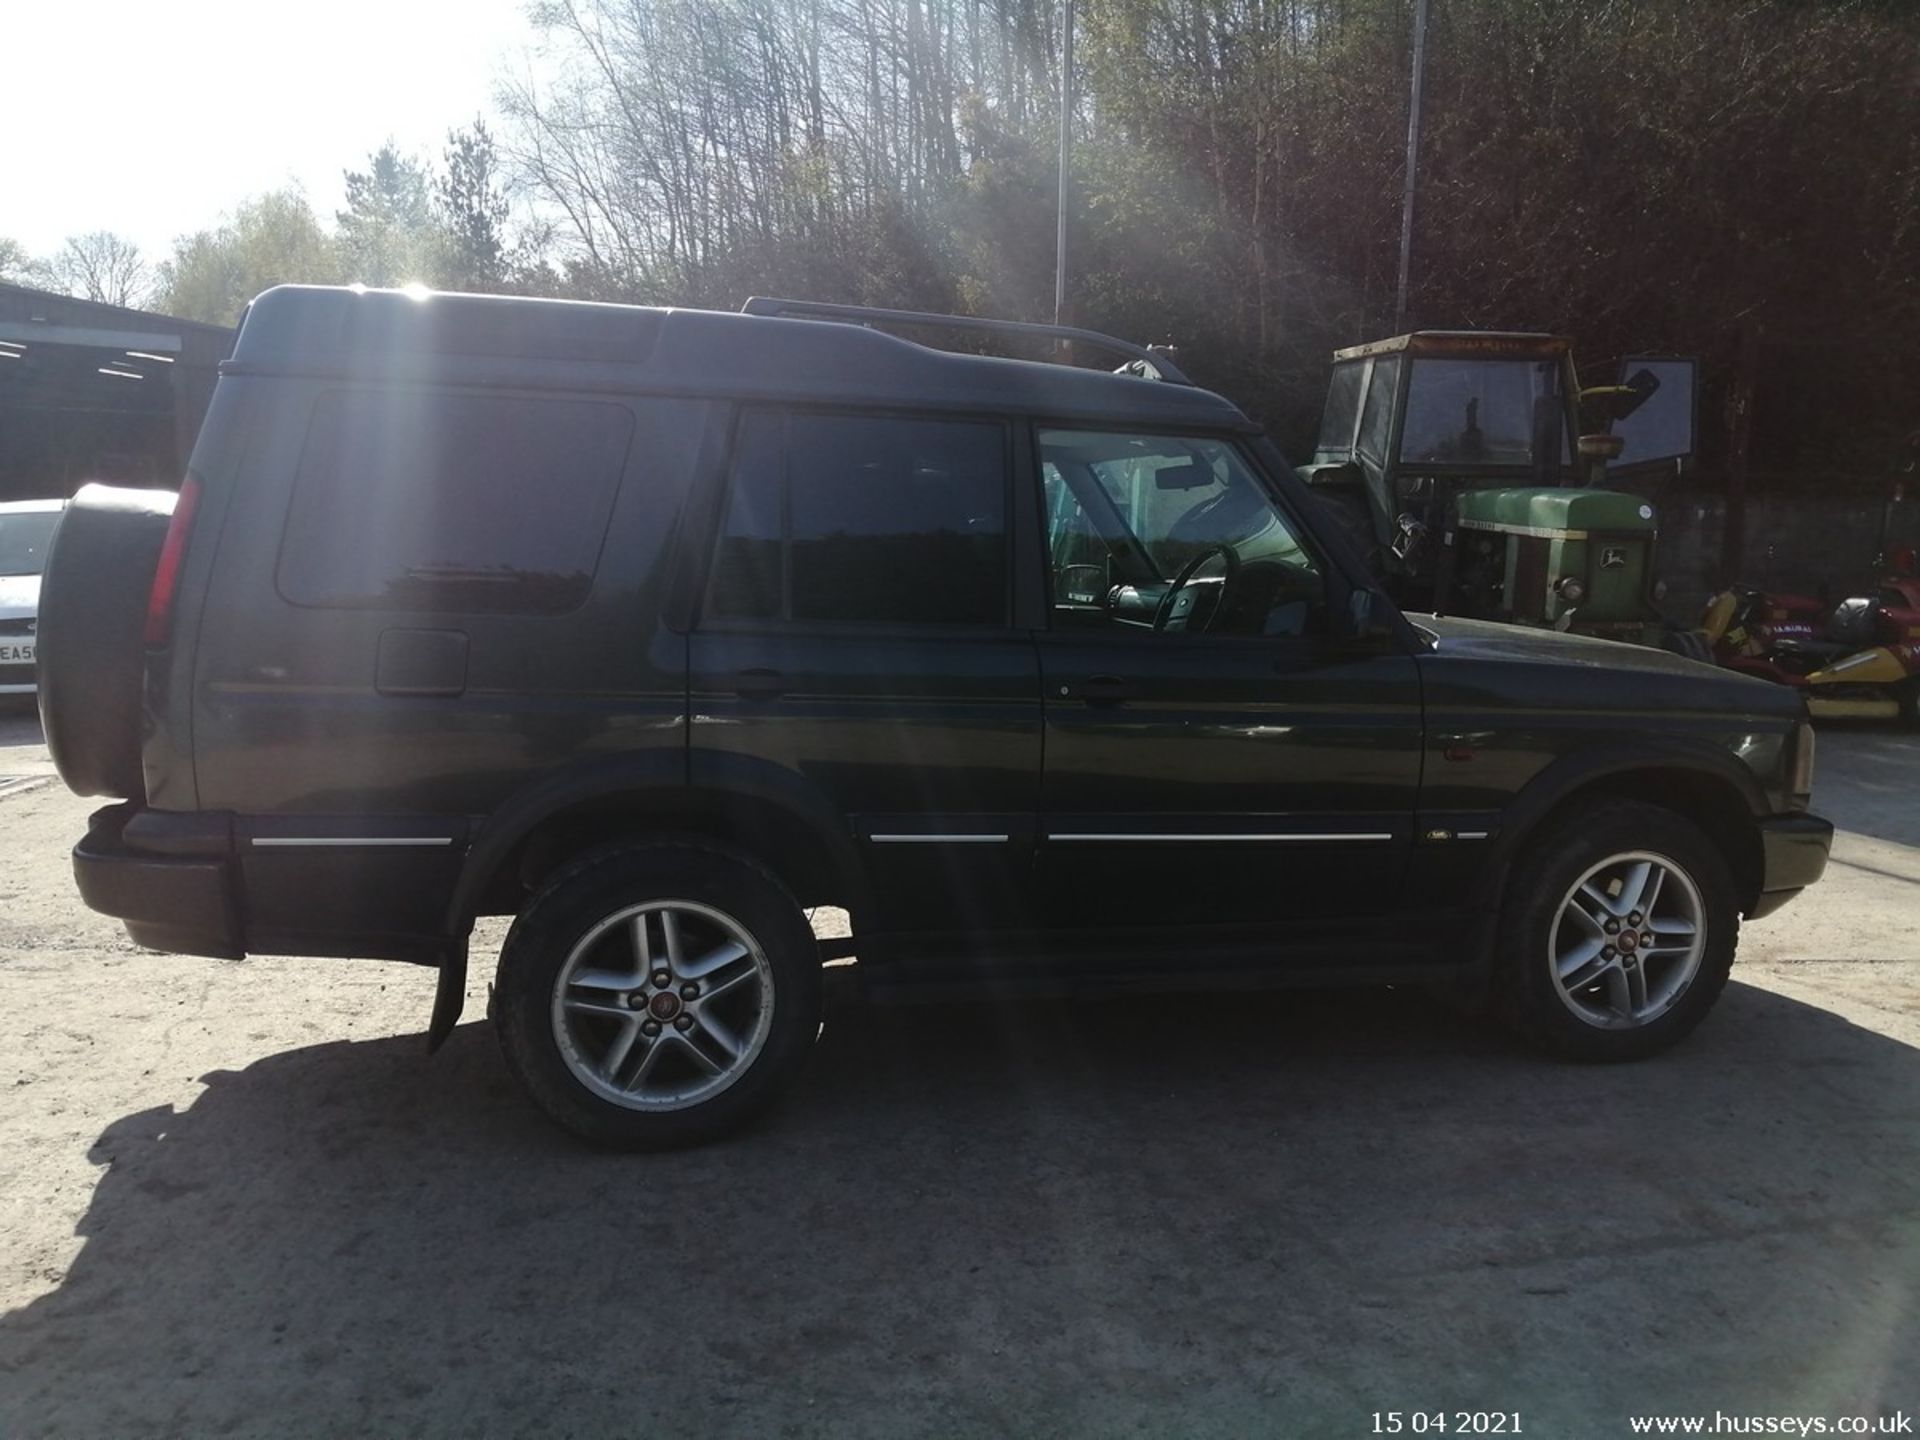 04/04 LAND ROVER DISCOVERY LANDMARK TD5 A - 2495cc 5dr Estate (Green) - Image 8 of 13